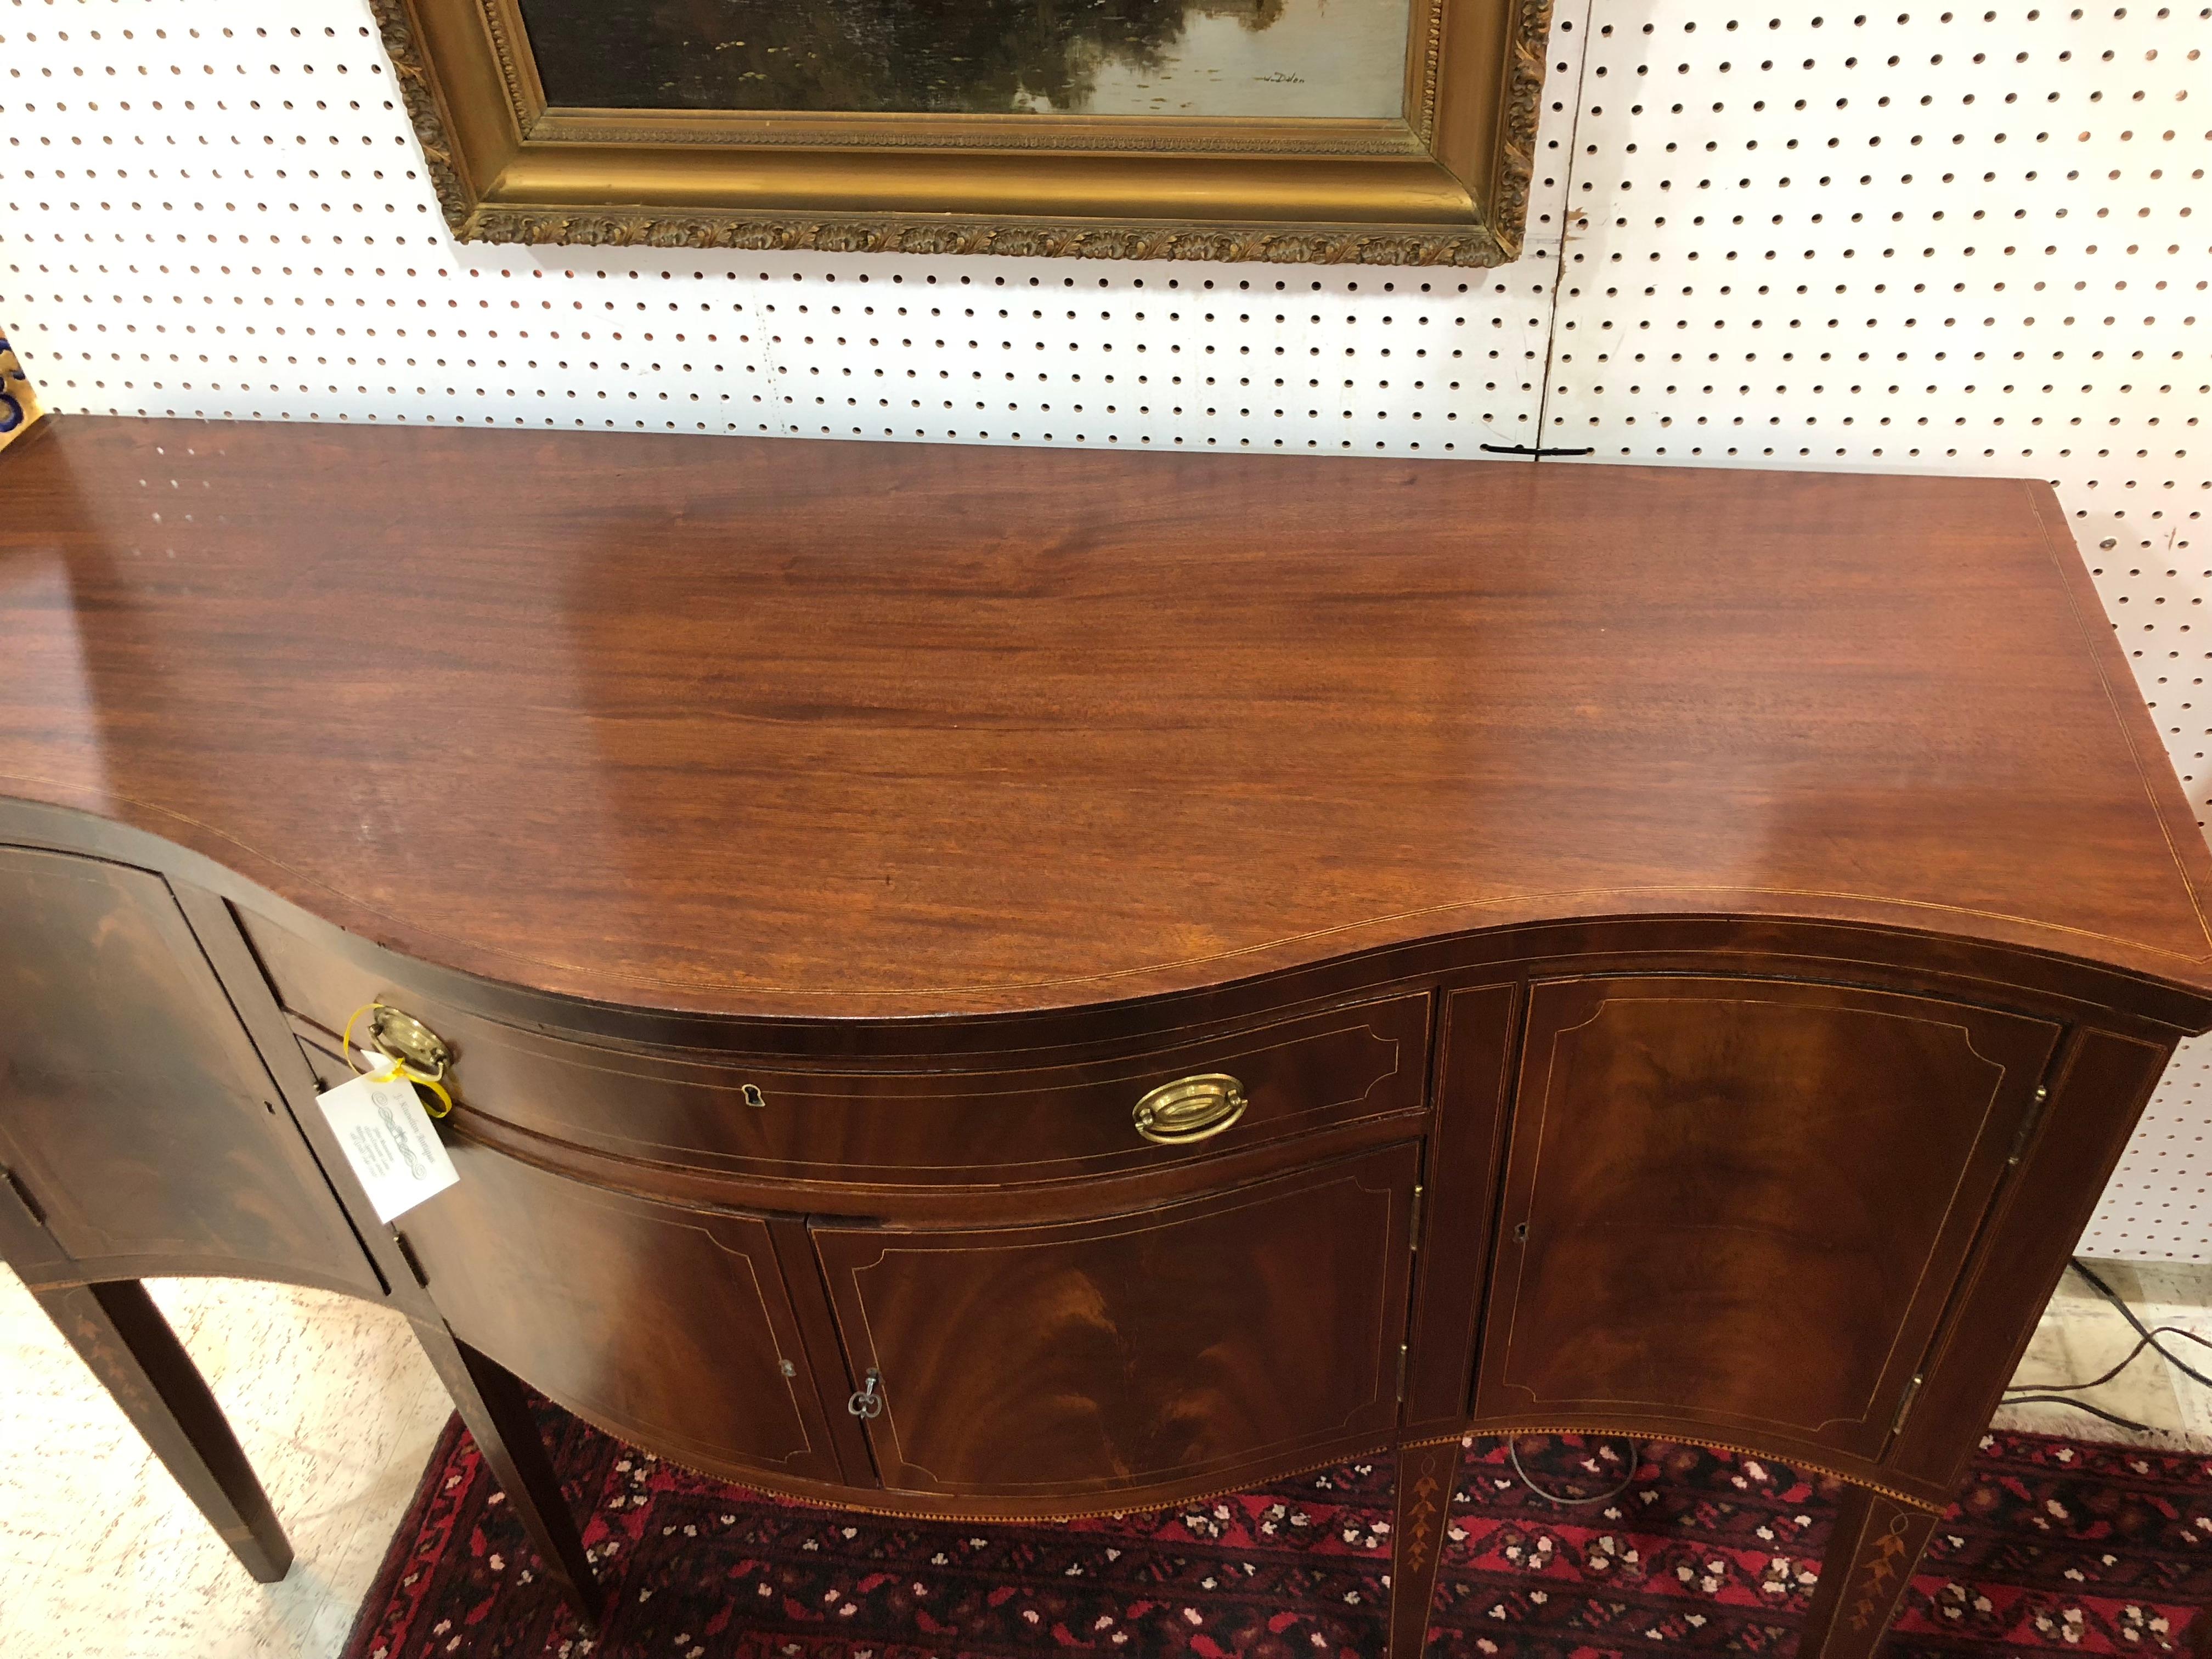 American Federal sideboard with fine inlaid bell flowers, line and tooth inlay. Tall and serpentine, with original brass ovals. Banded inlay on the legs. Original key, line inlay around the top edge. Excellent color and finish.